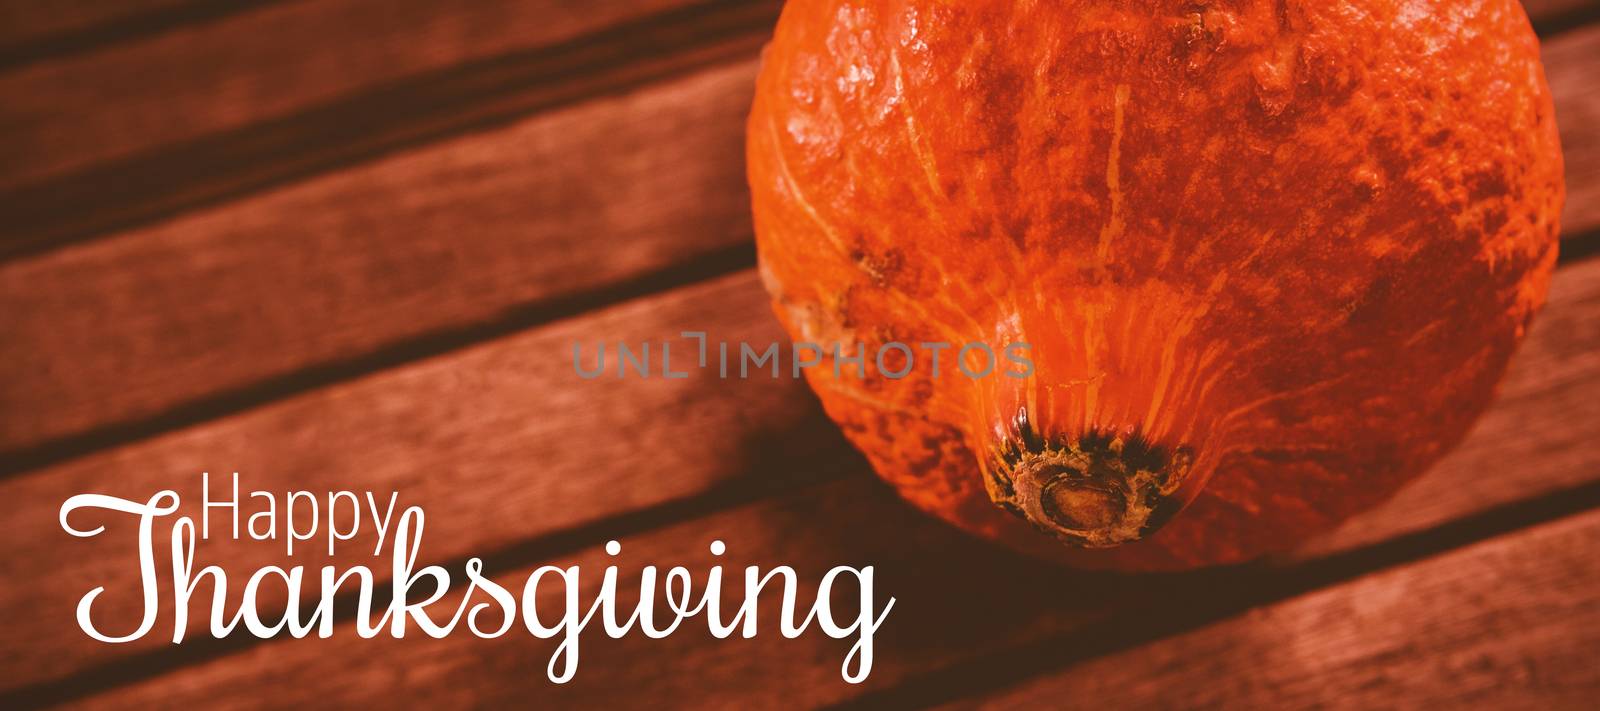 Thanksgiving greeting text against close up of squash on table during halloween